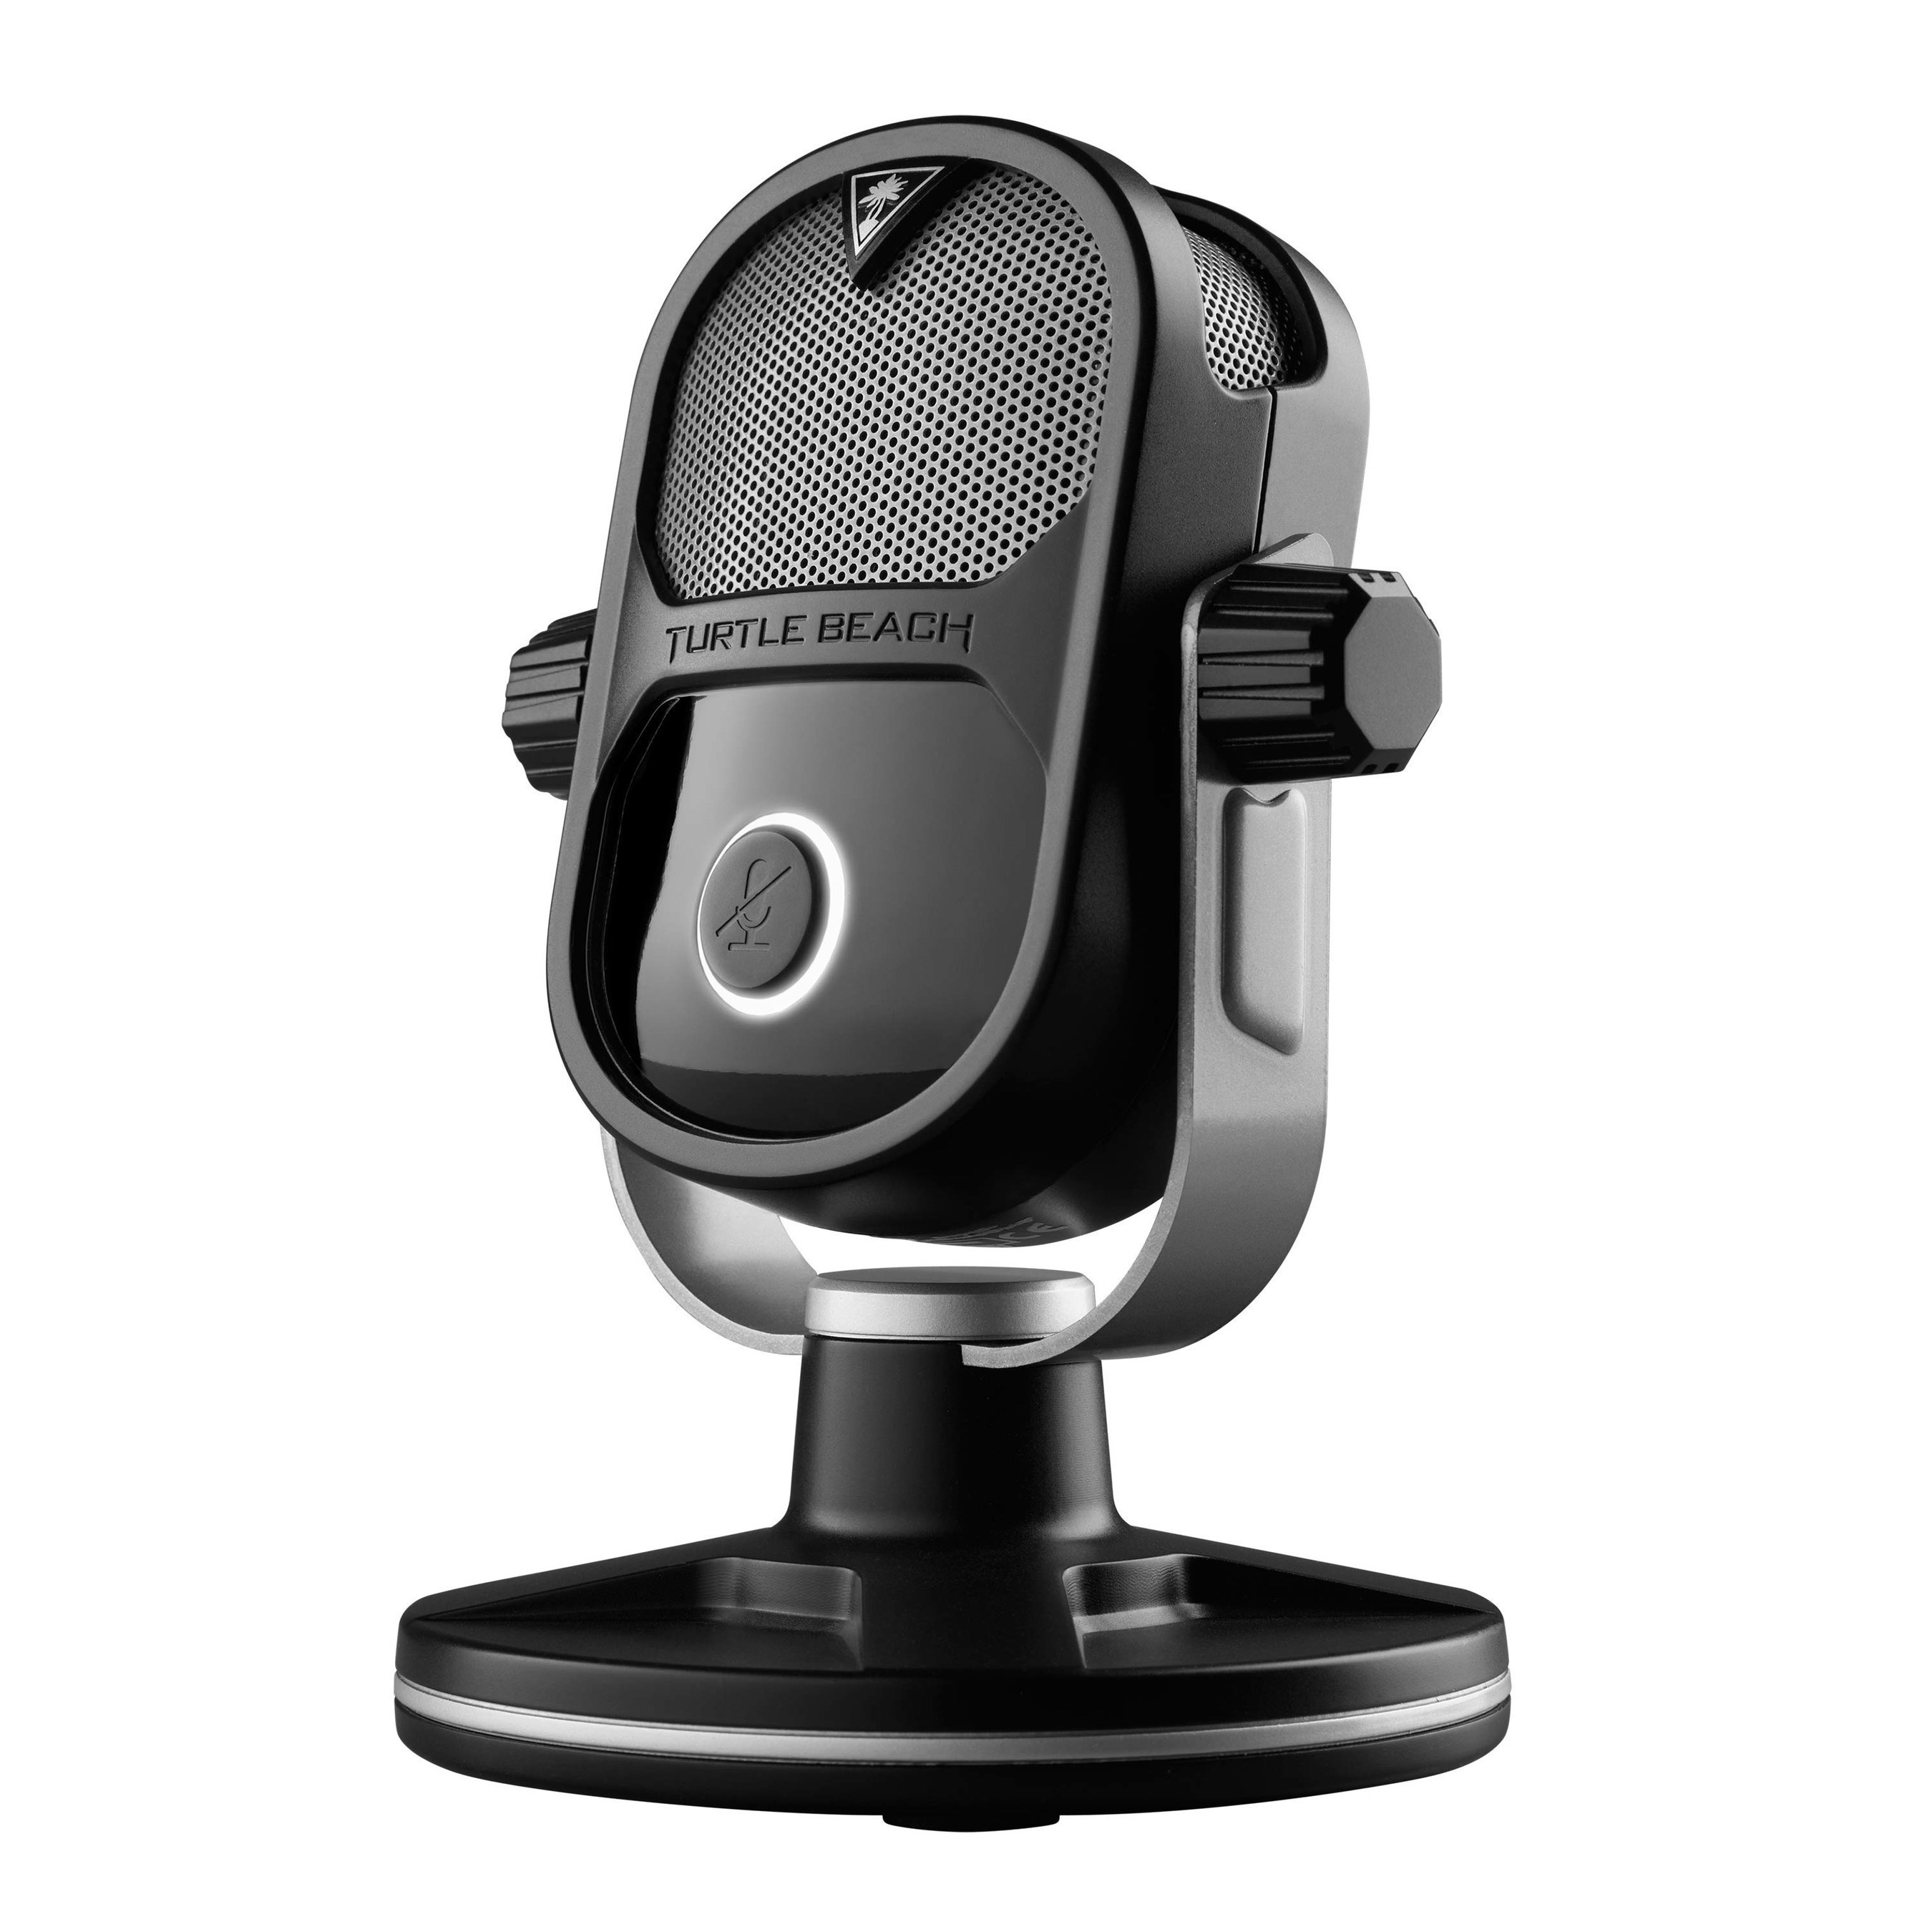 The Turtle Beach Stream Mic is the first professional, studio-quality desktop microphone designed to allow gamers to livestream content directly from their Xbox One and PlayStation(R)4 consoles, as well as from PC and Mac.